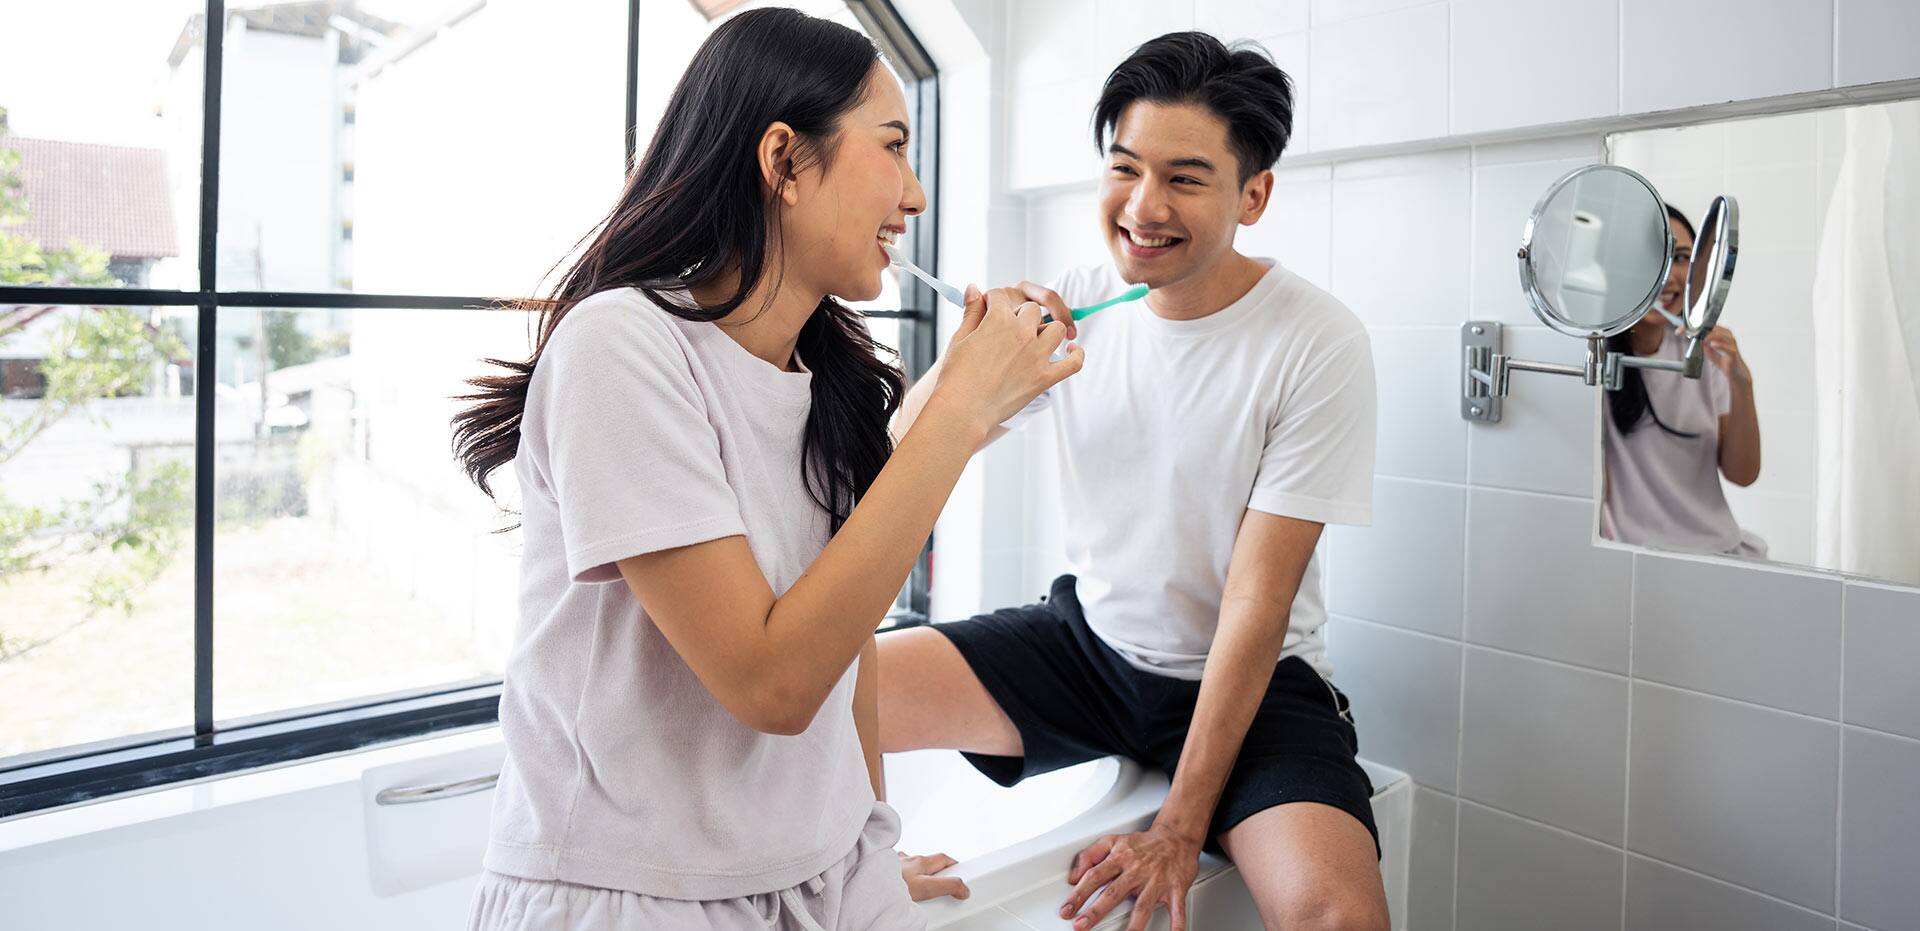 Asian new marriage couple brushing teeth together in bathroom at home. Attractive young man and woman feeling happy and relax, enjoy holiday honeymoon anniversary day then looking each other in house.